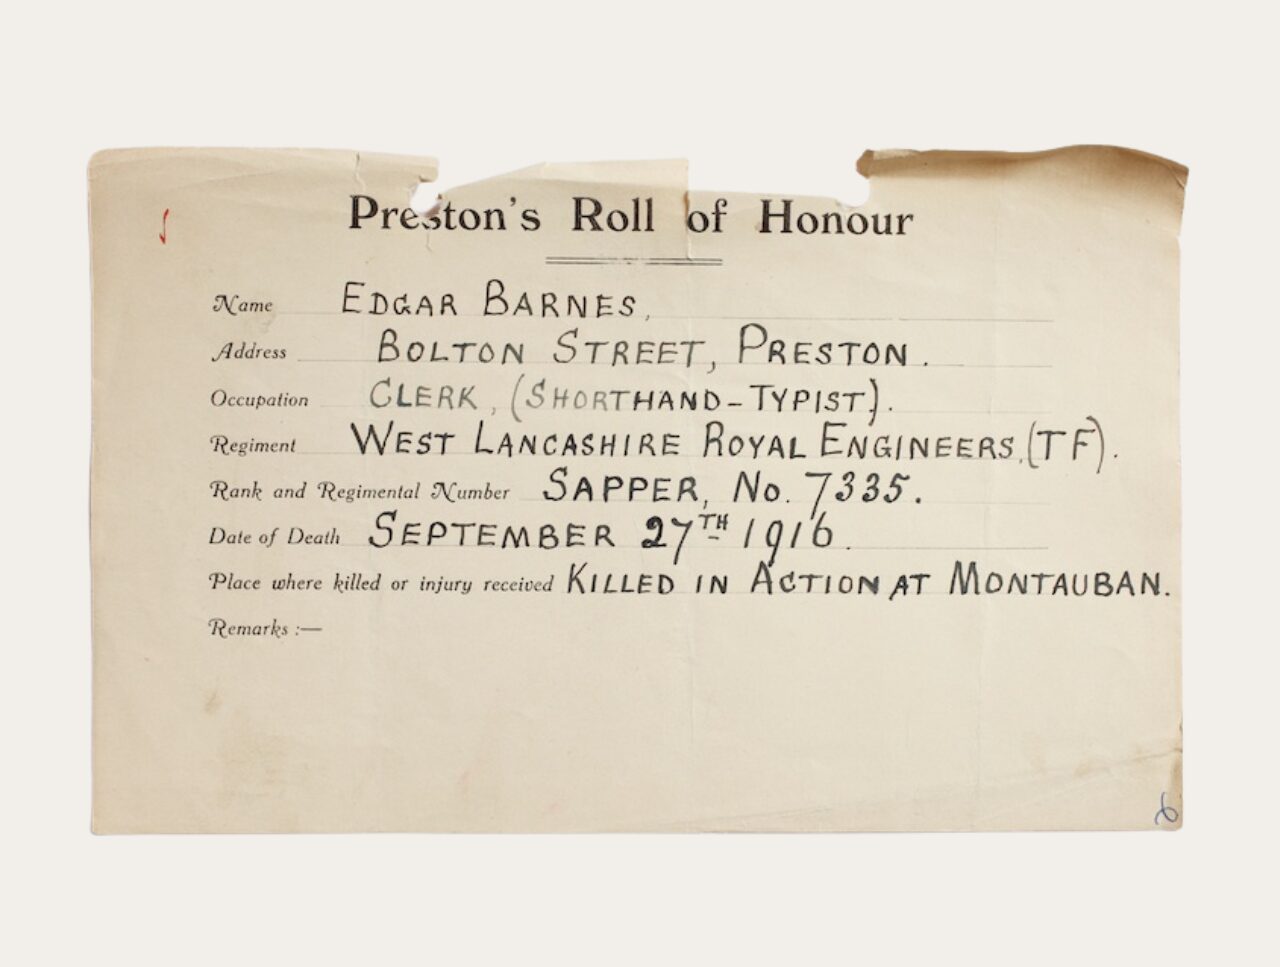 A form submitted detailing the death of a soldier from Preston.